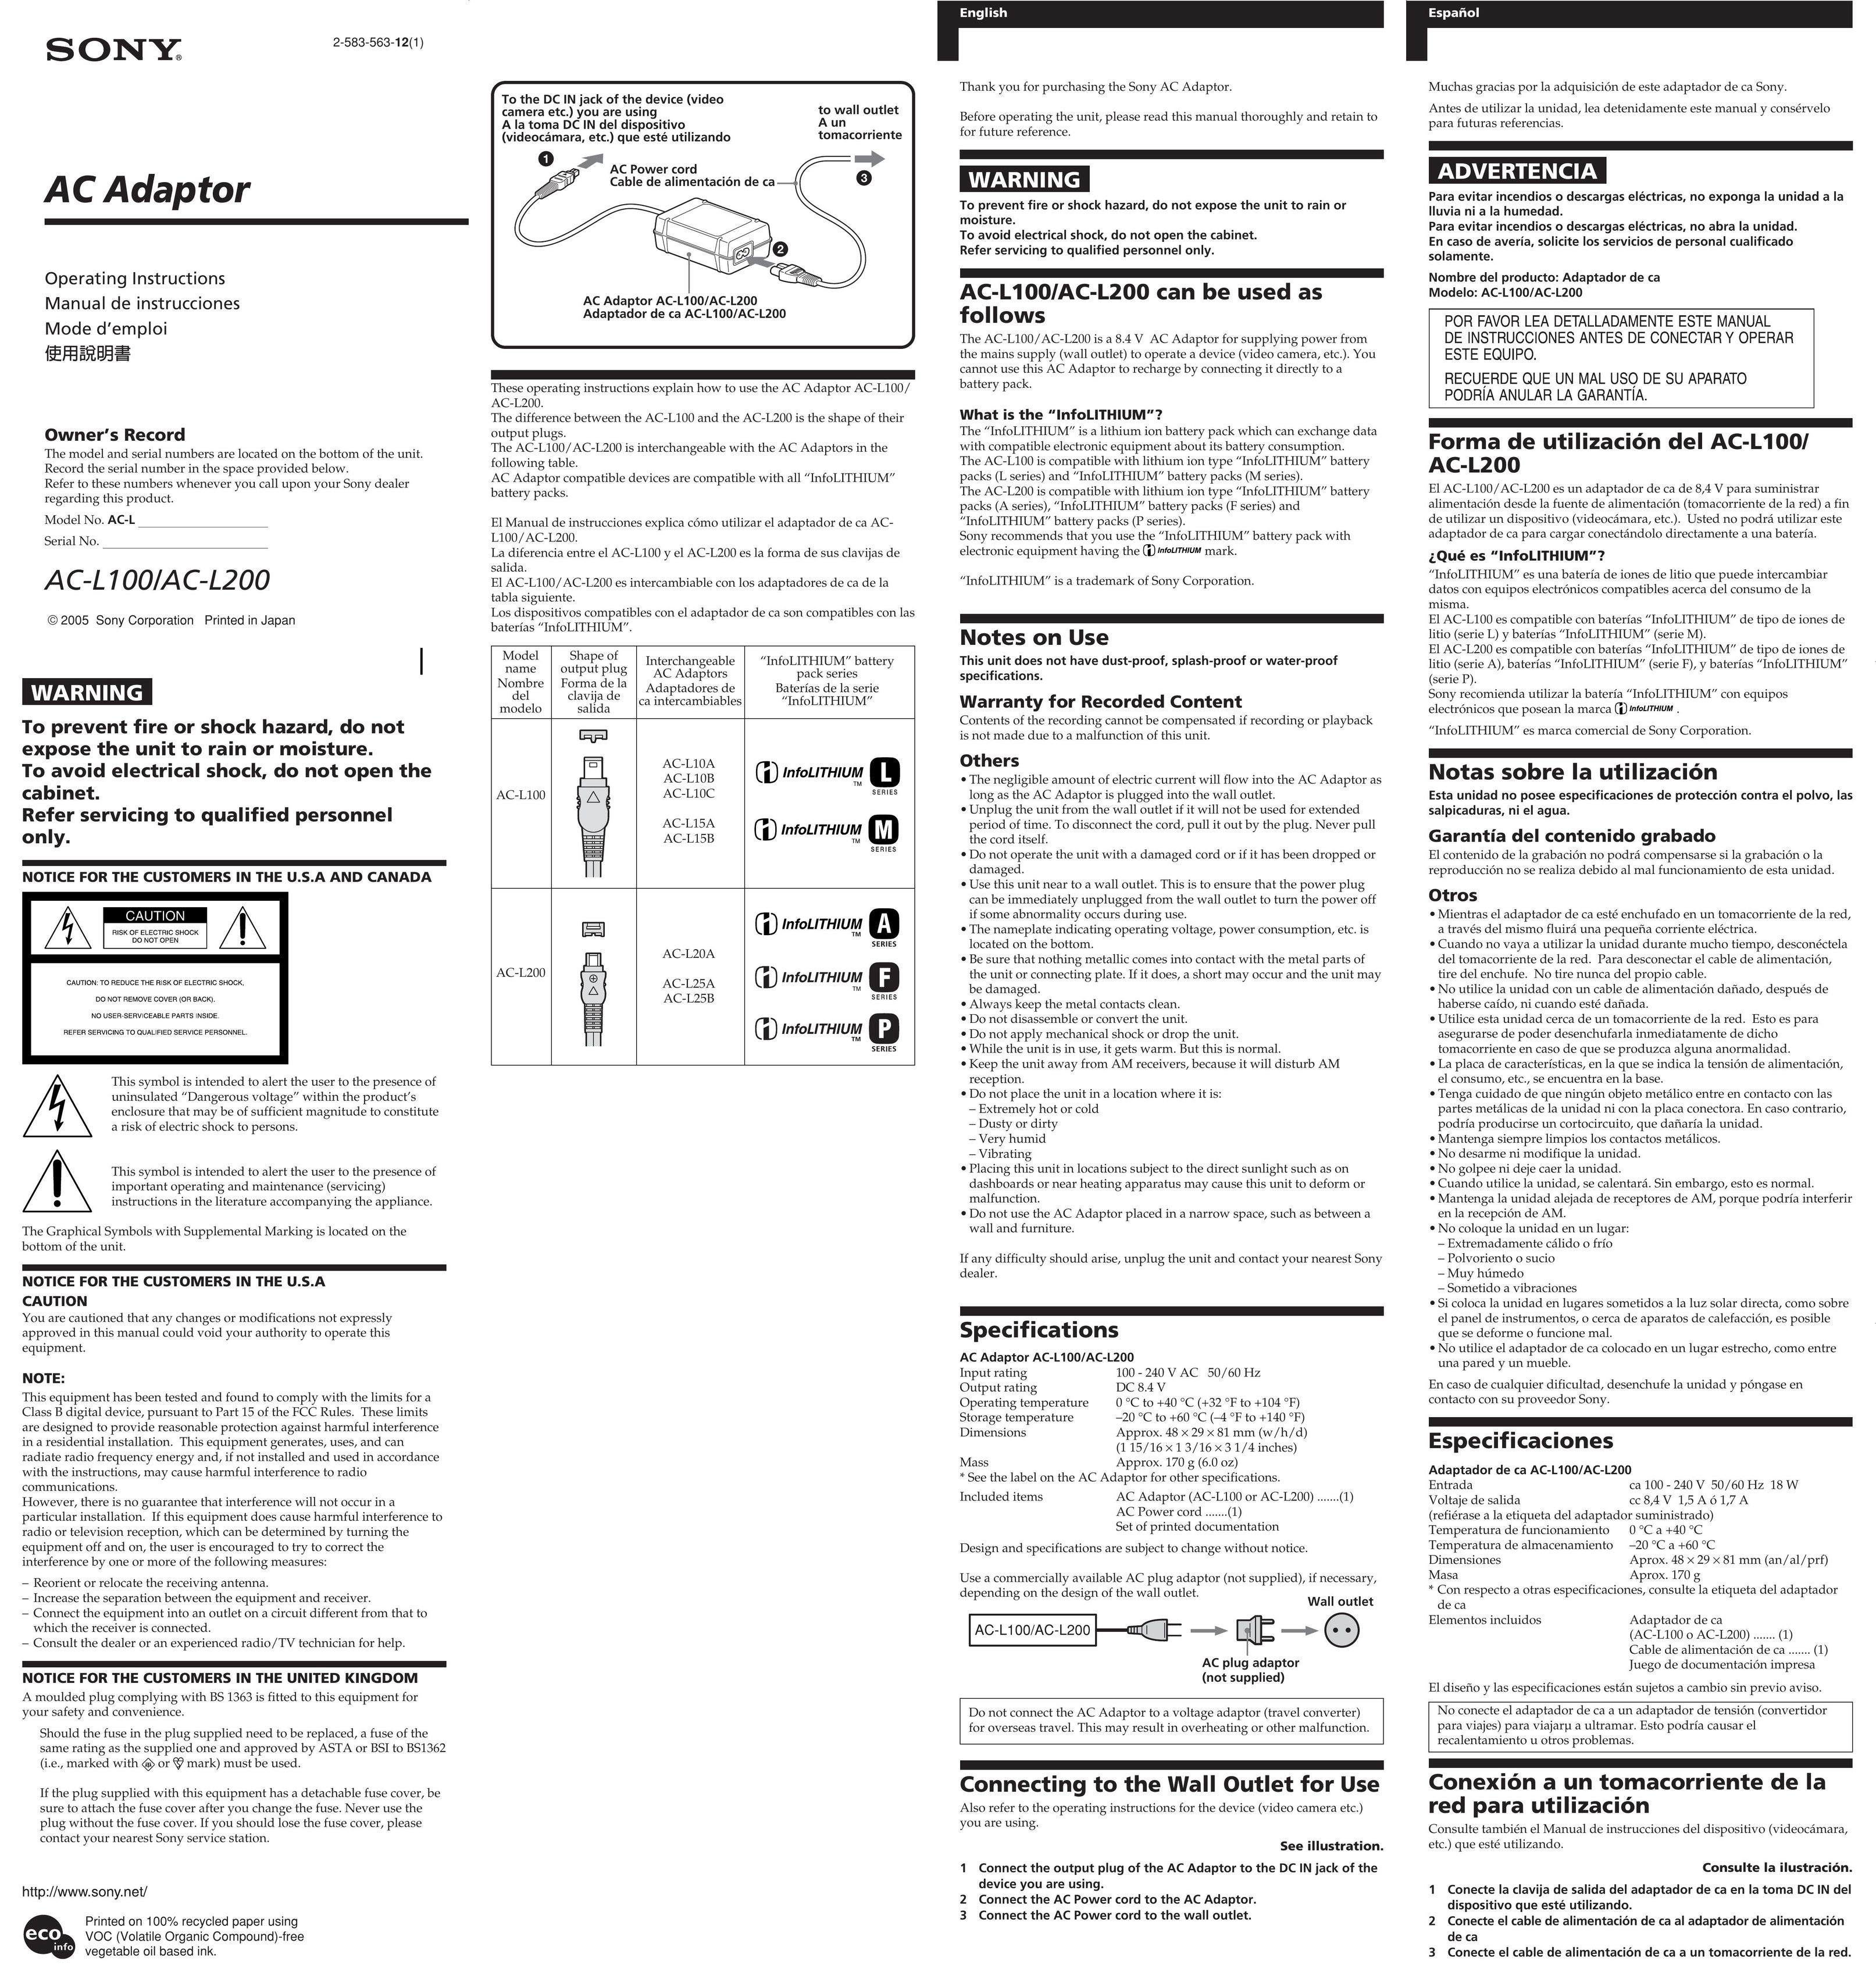 Sony AC-L200 Battery Charger User Manual